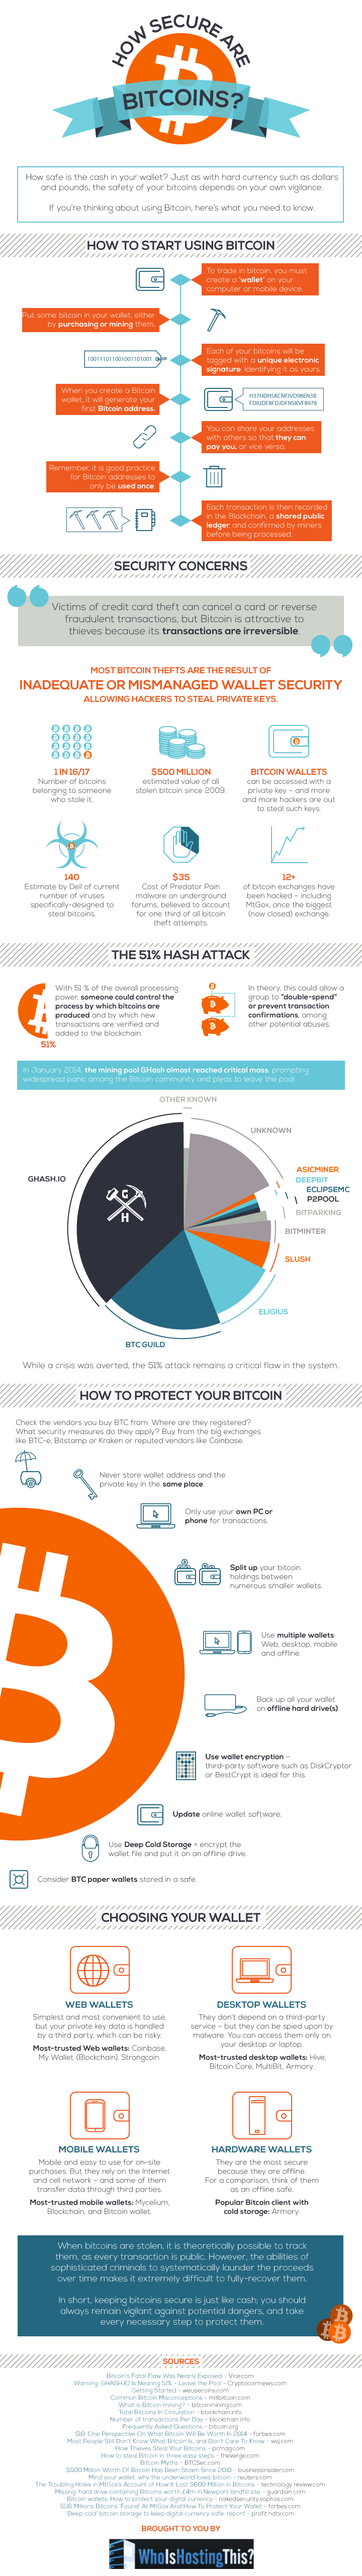 how to get started with bitcoin infographic